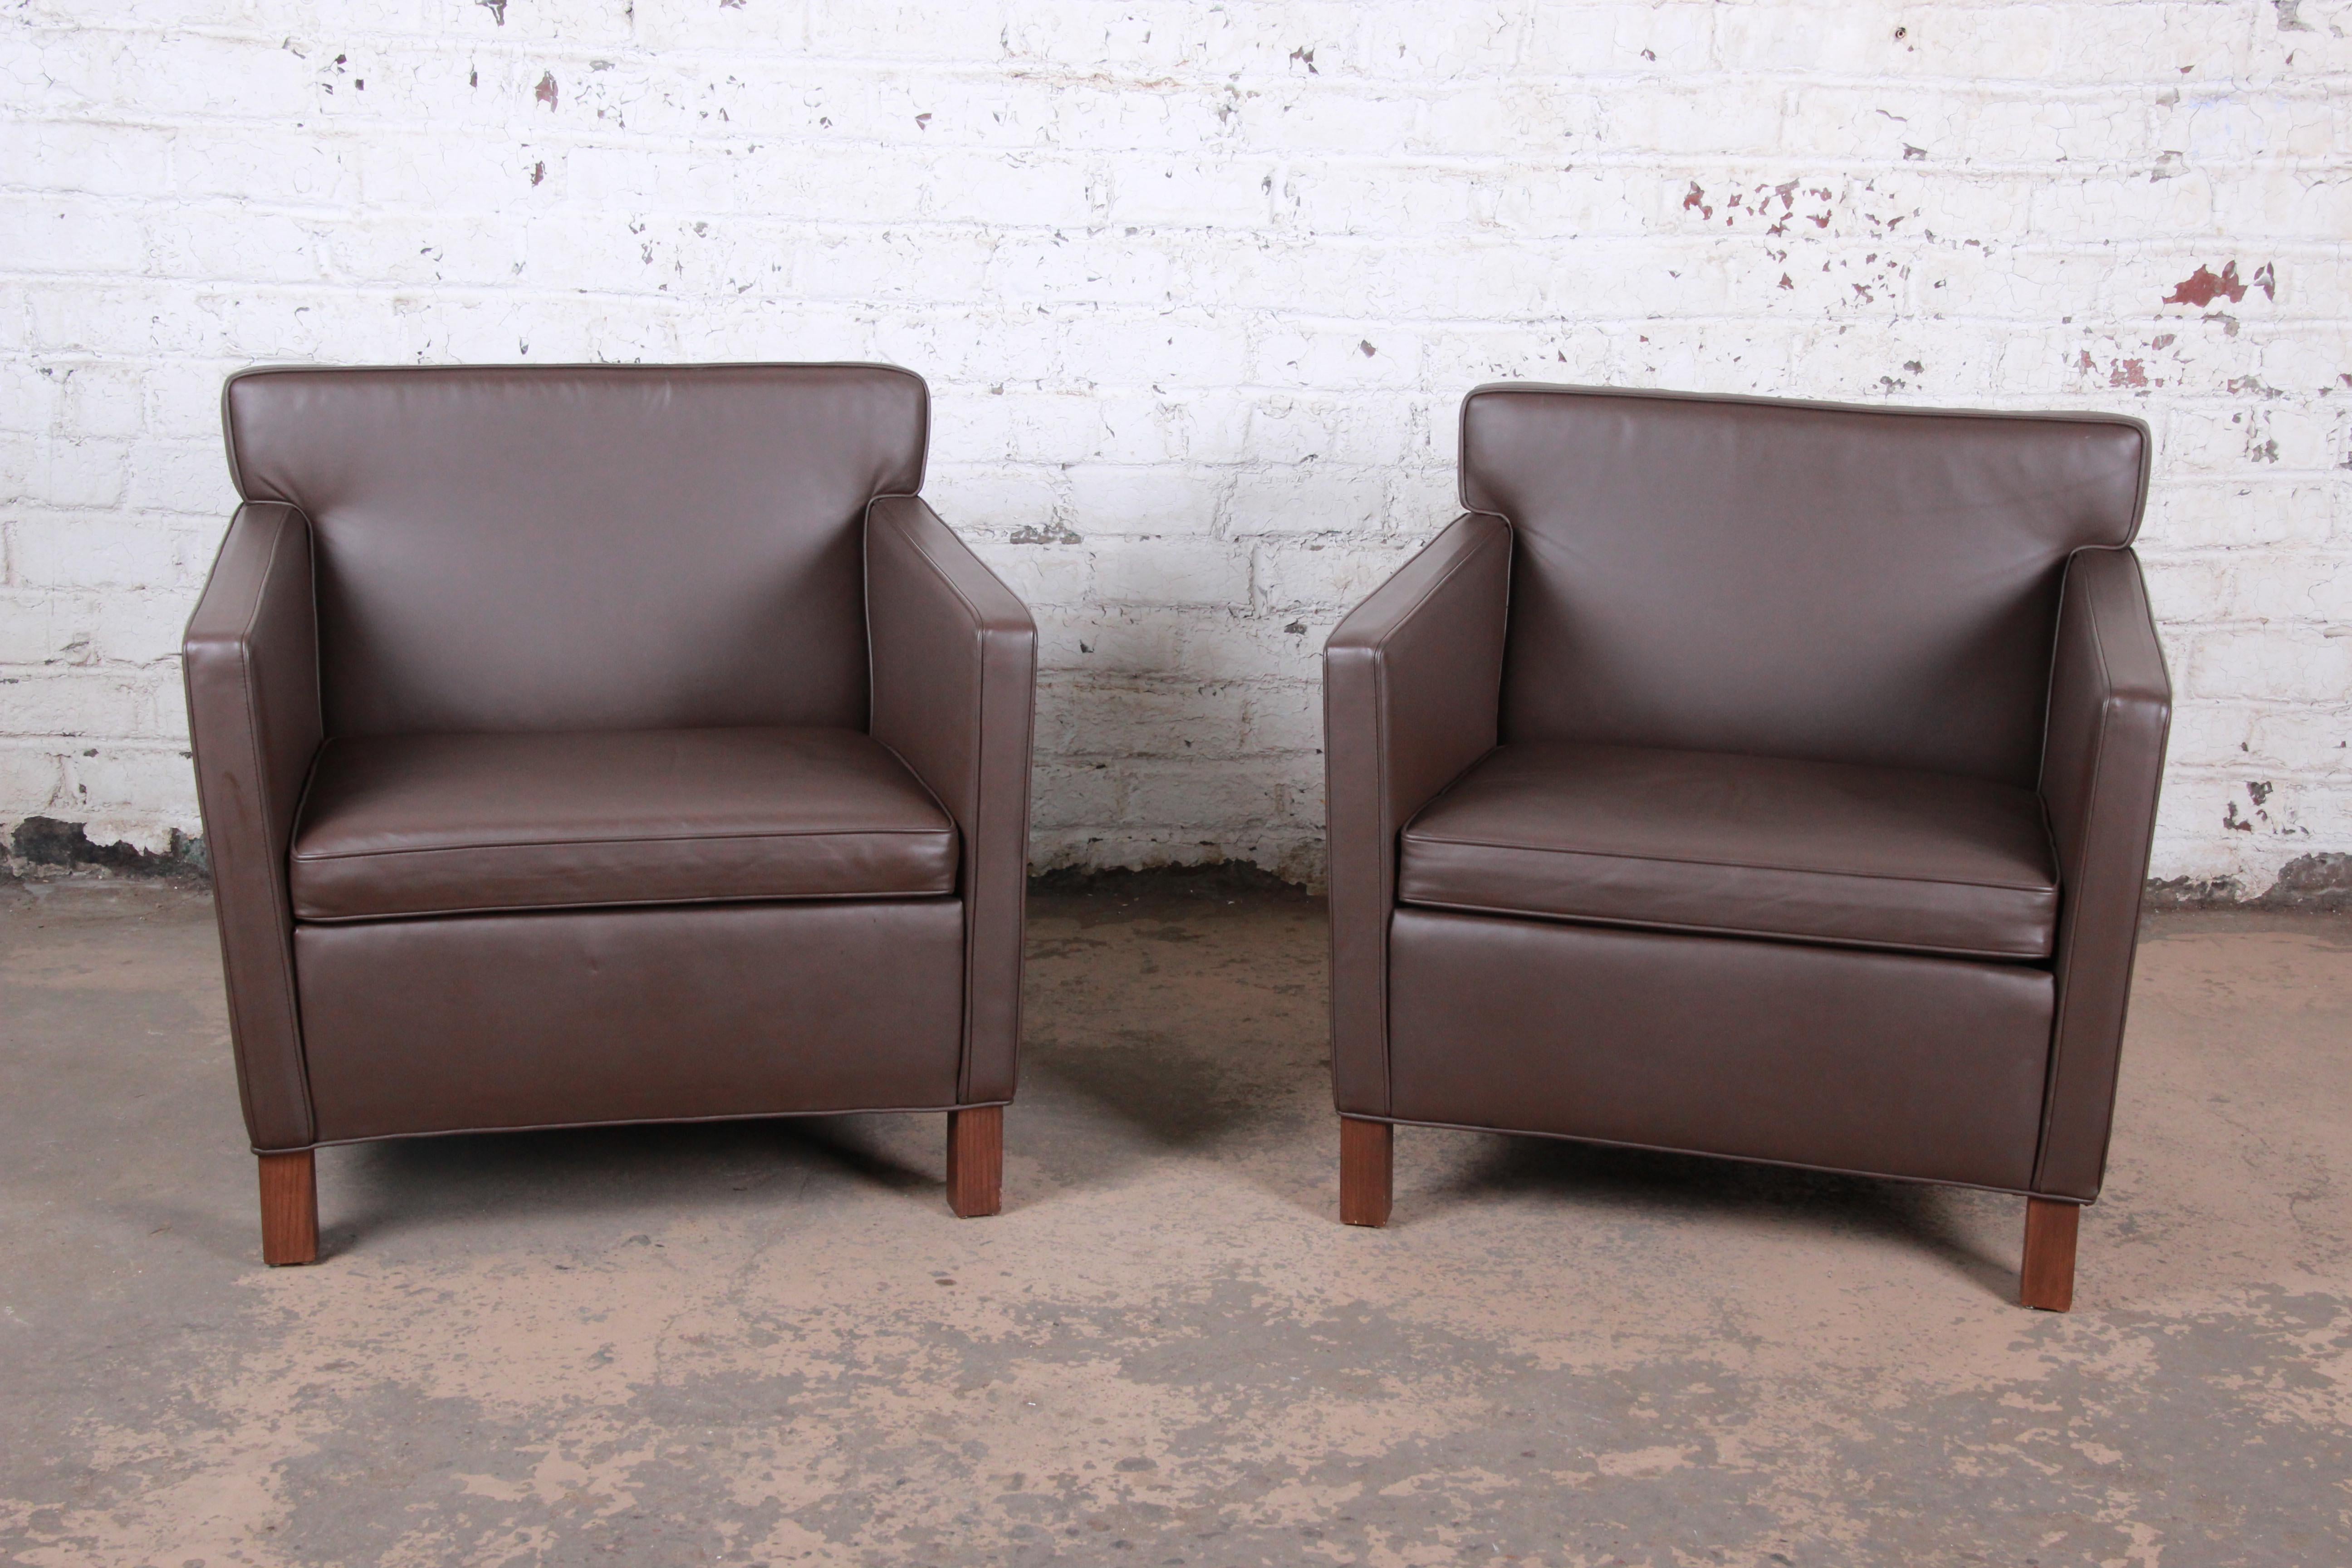 An exceptional pair of brown leather lounge chairs designed in 1927 by Ludwig Mies van der Rohe and produced by Knoll Studio. The chairs feature high-end leather upholstery with solid walnut legs and a sleek modern design. These recent production